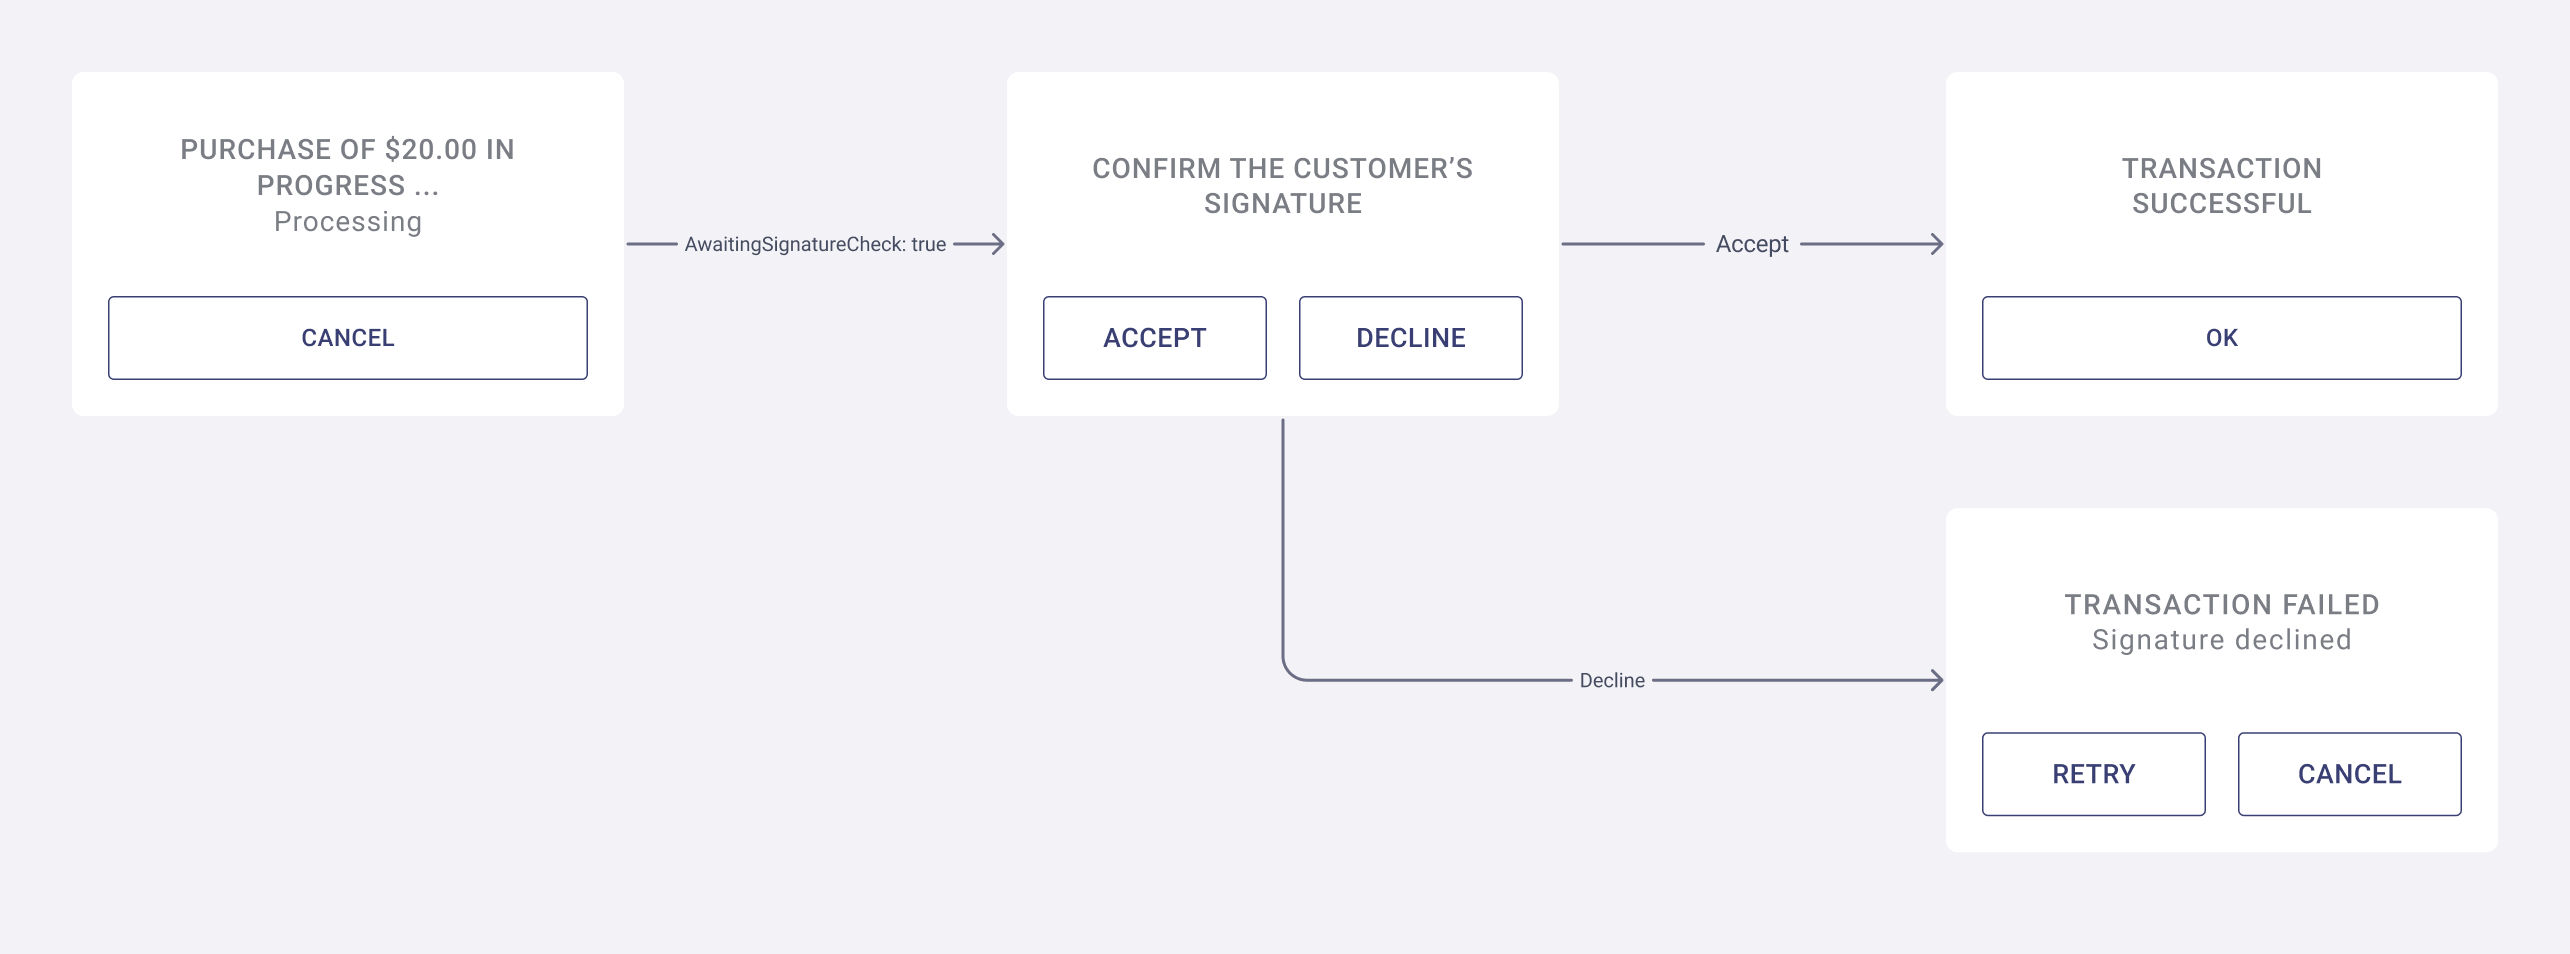 A flow diagram of the UI screens needed for a signature required transaction.